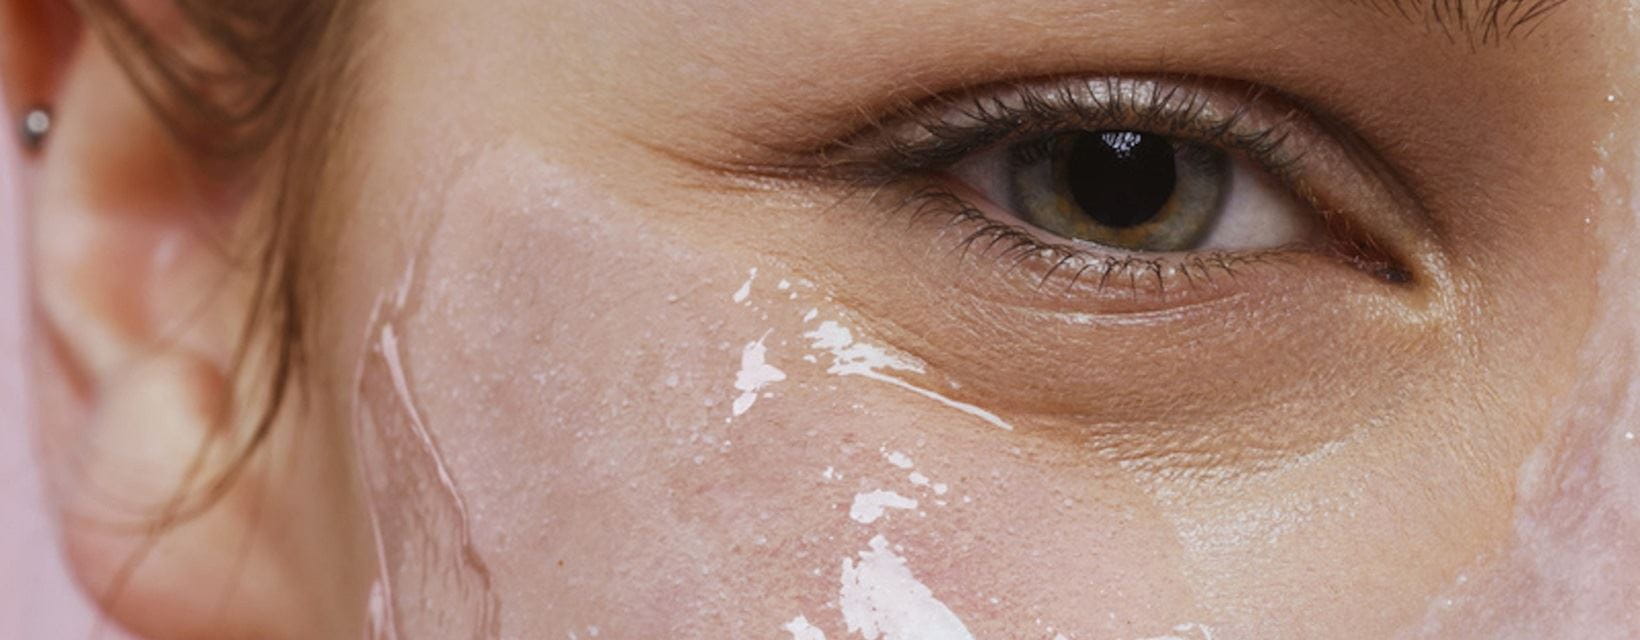 Post-Exfoliation Care Tips for the Summer Season